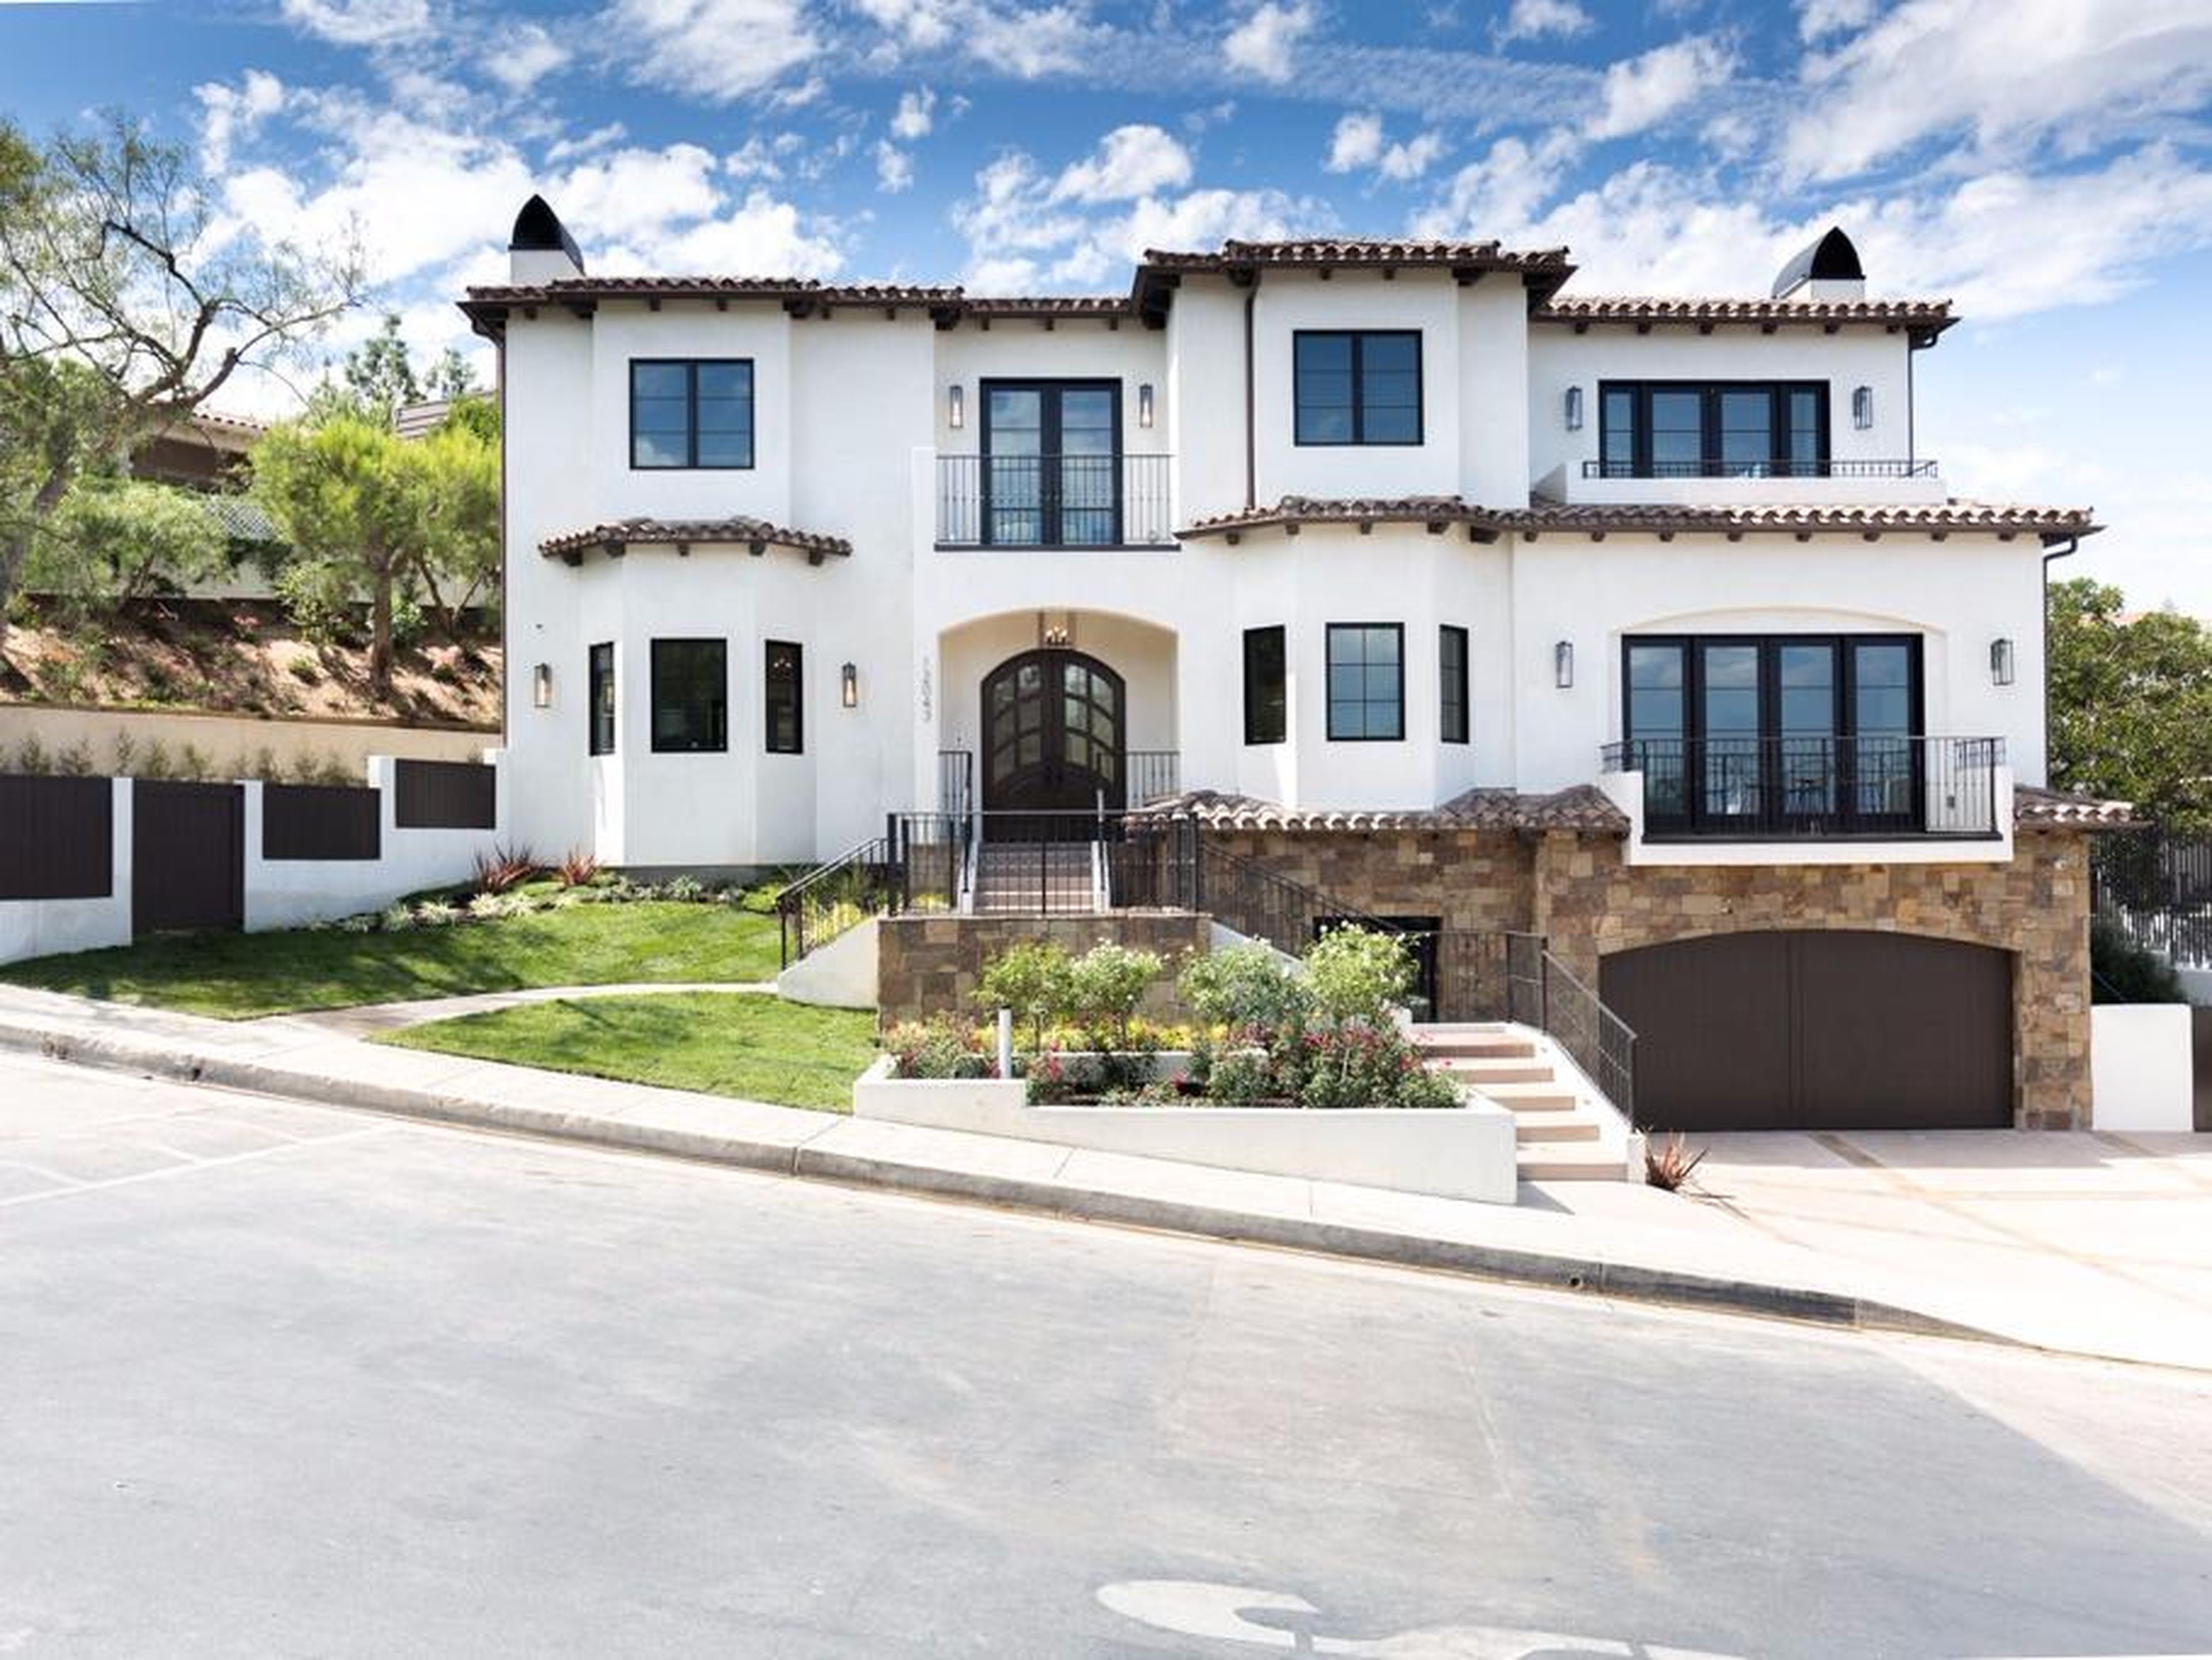 The 6,000-square-foot, three-story Spanish-style residence sits on a quarter-acre lot in a gated community.